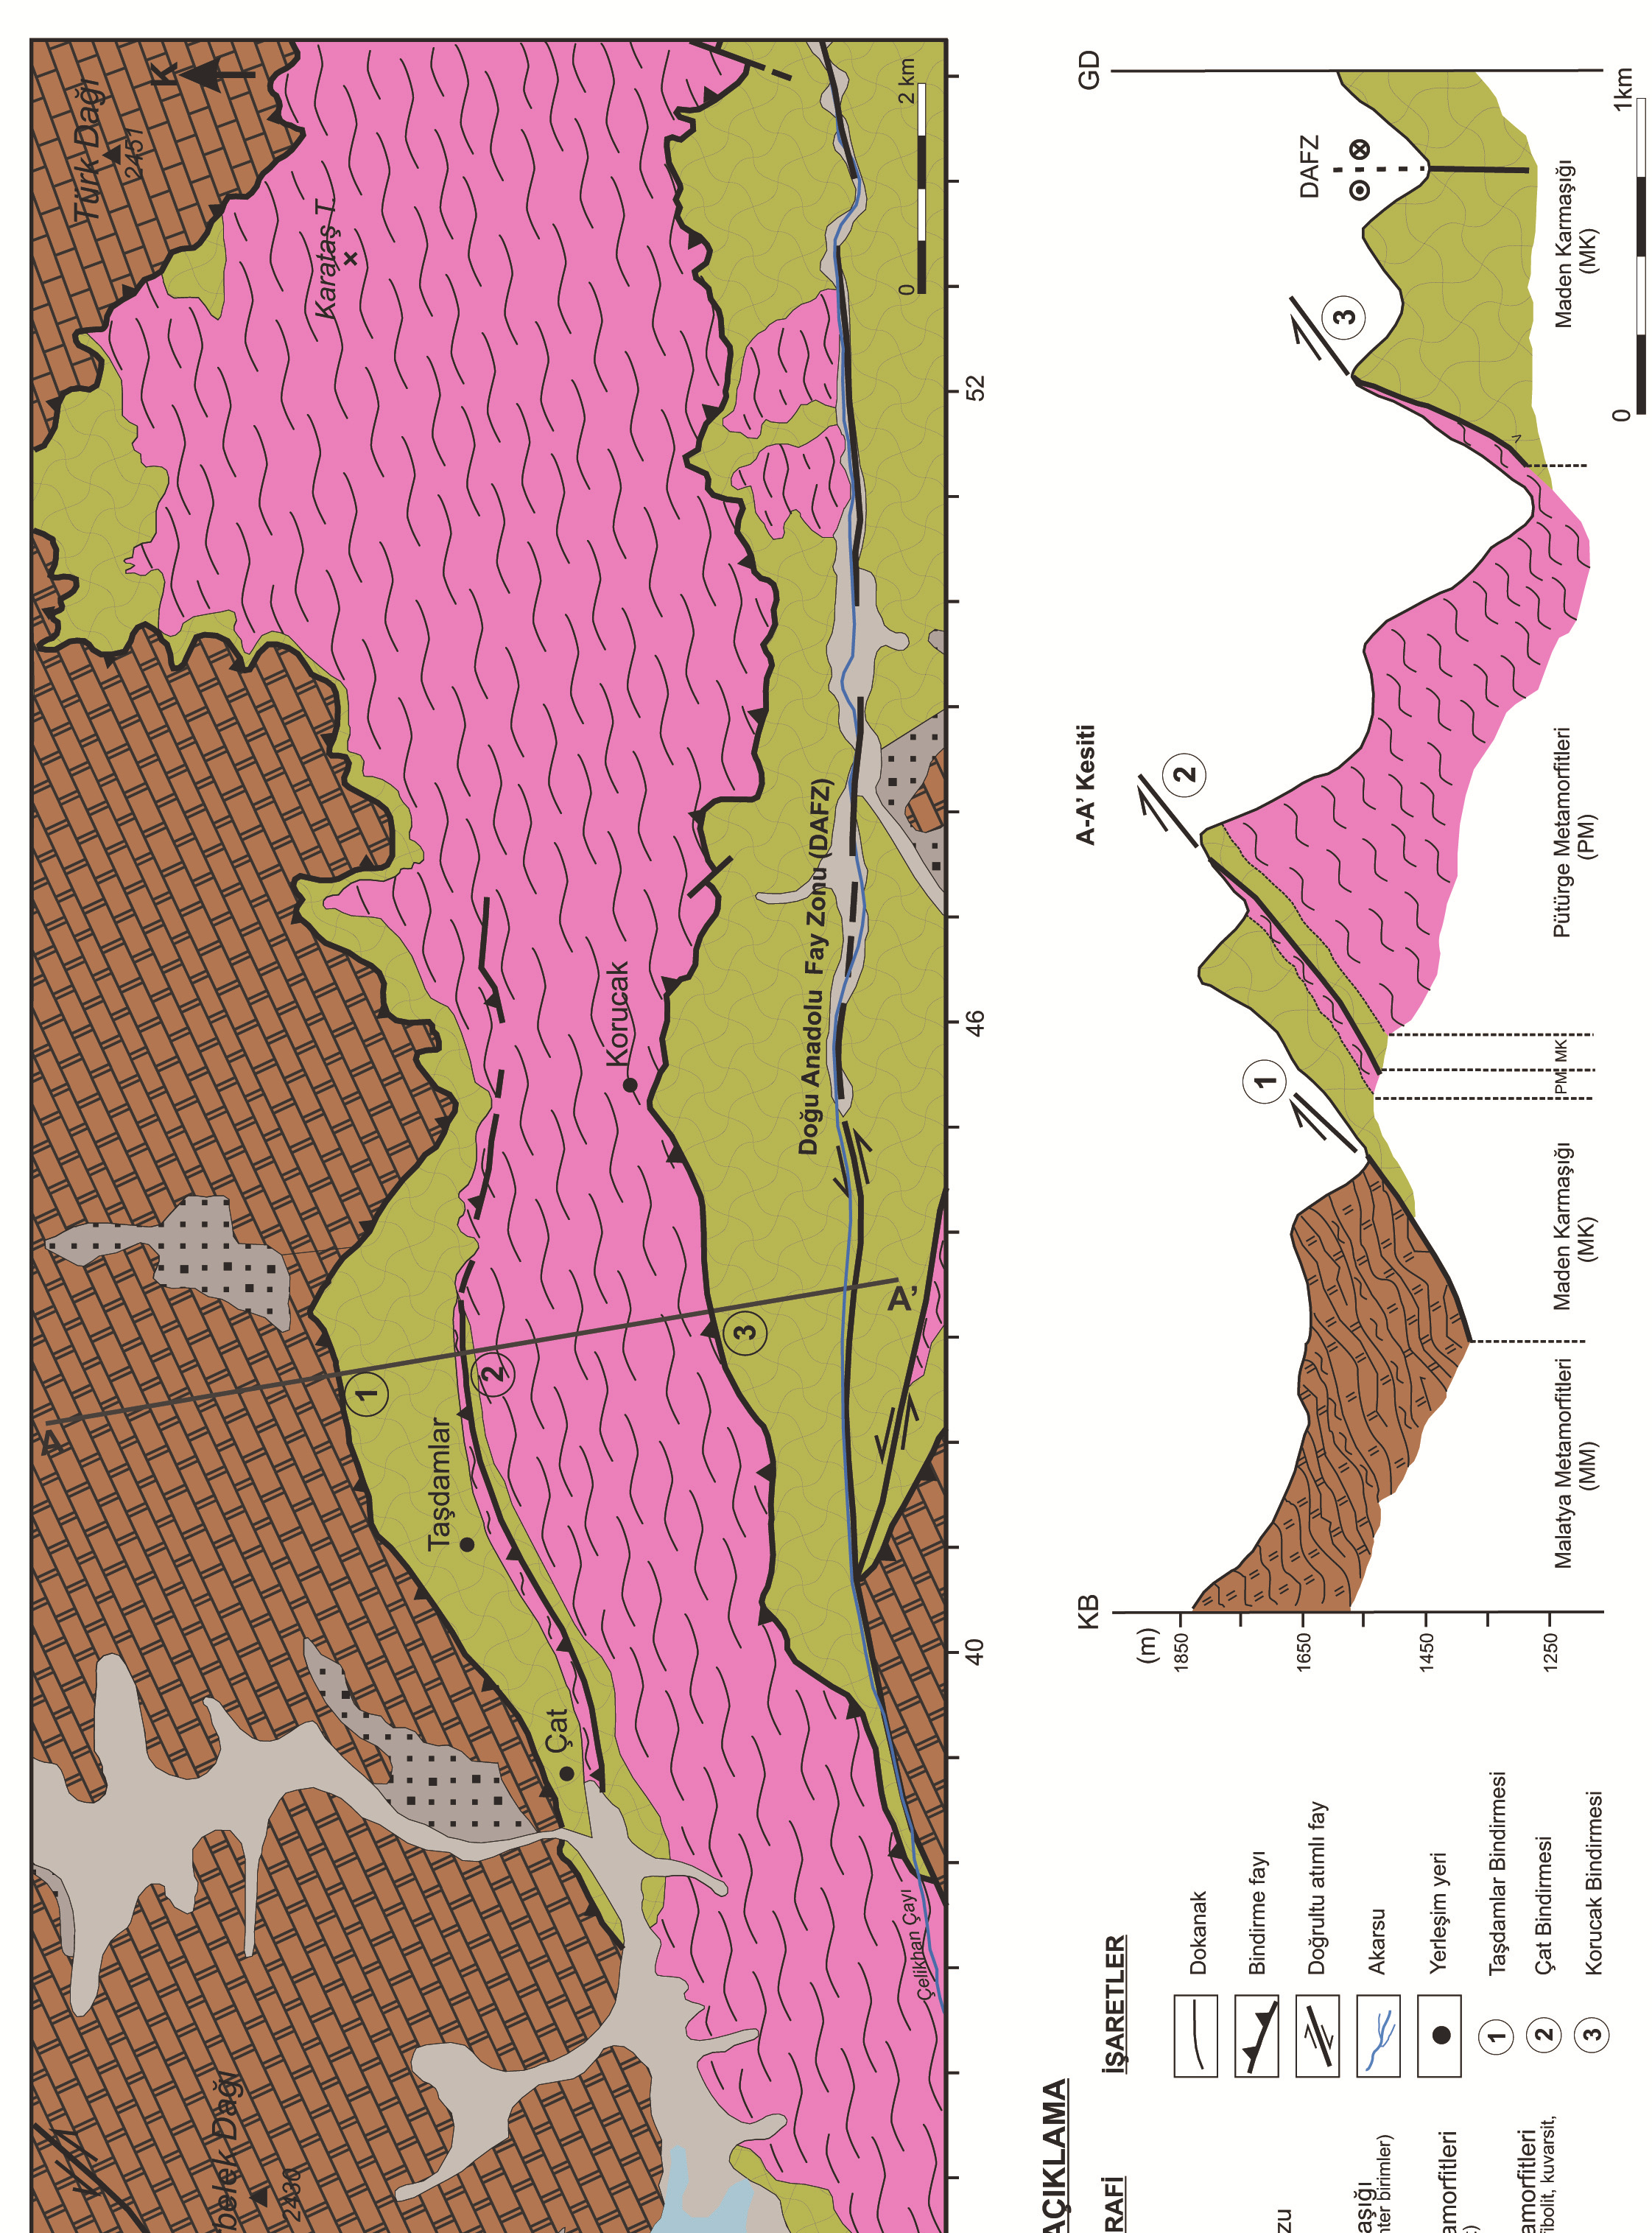 133 Figure 2. (a) Geological map of the study area (modified from Karaman et al.